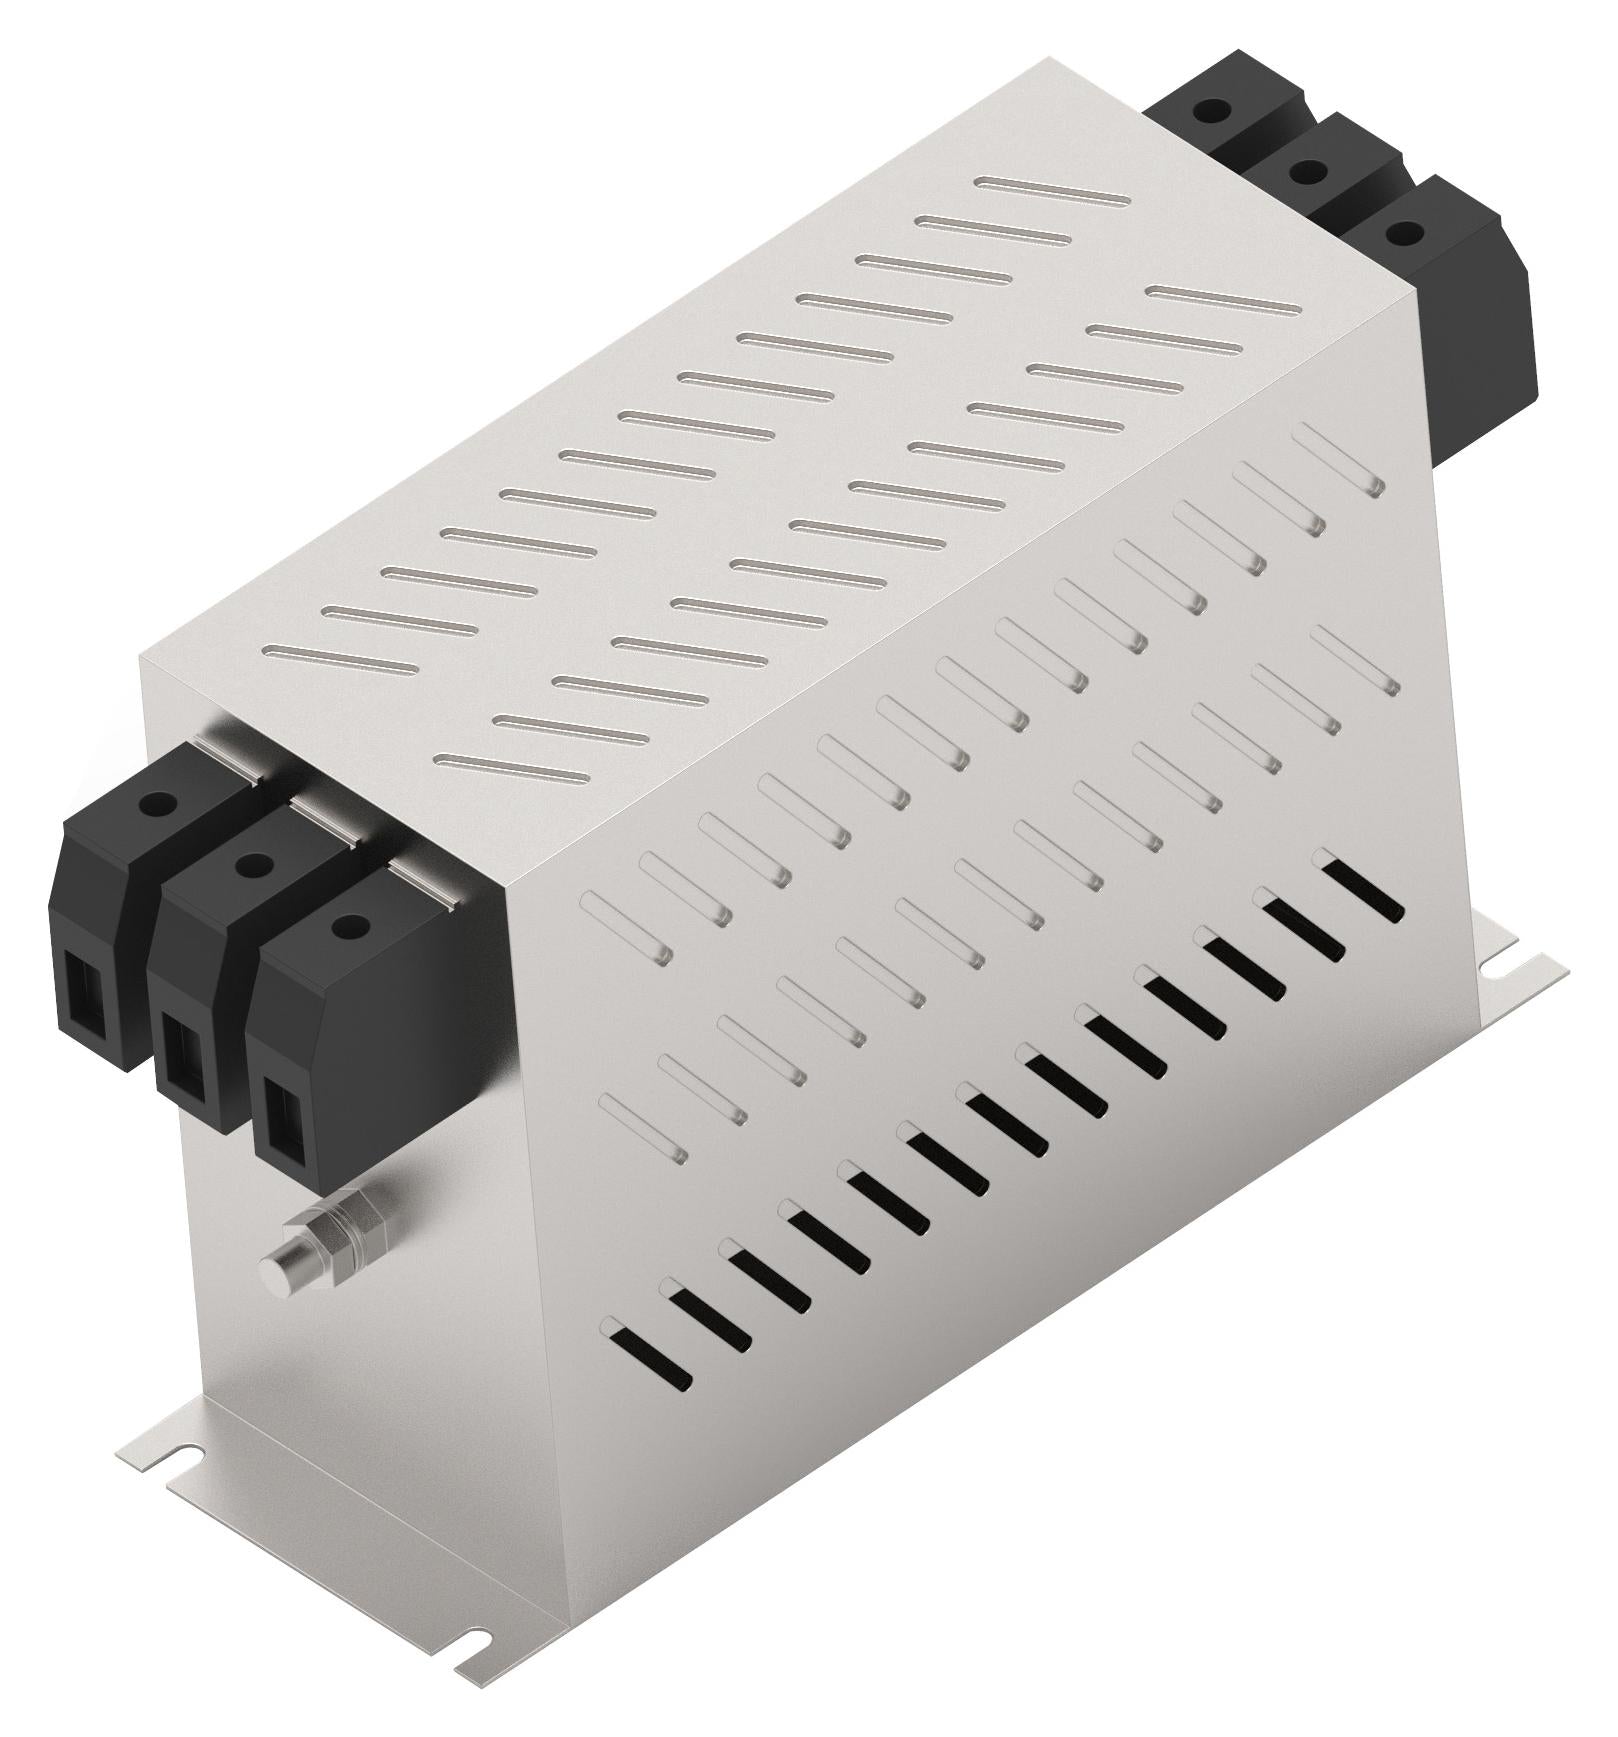 120KEMS10ABSD POWER LINE FILTER, 3 PHASE, 120A, 440VAC CORCOM - TE CONNECTIVITY